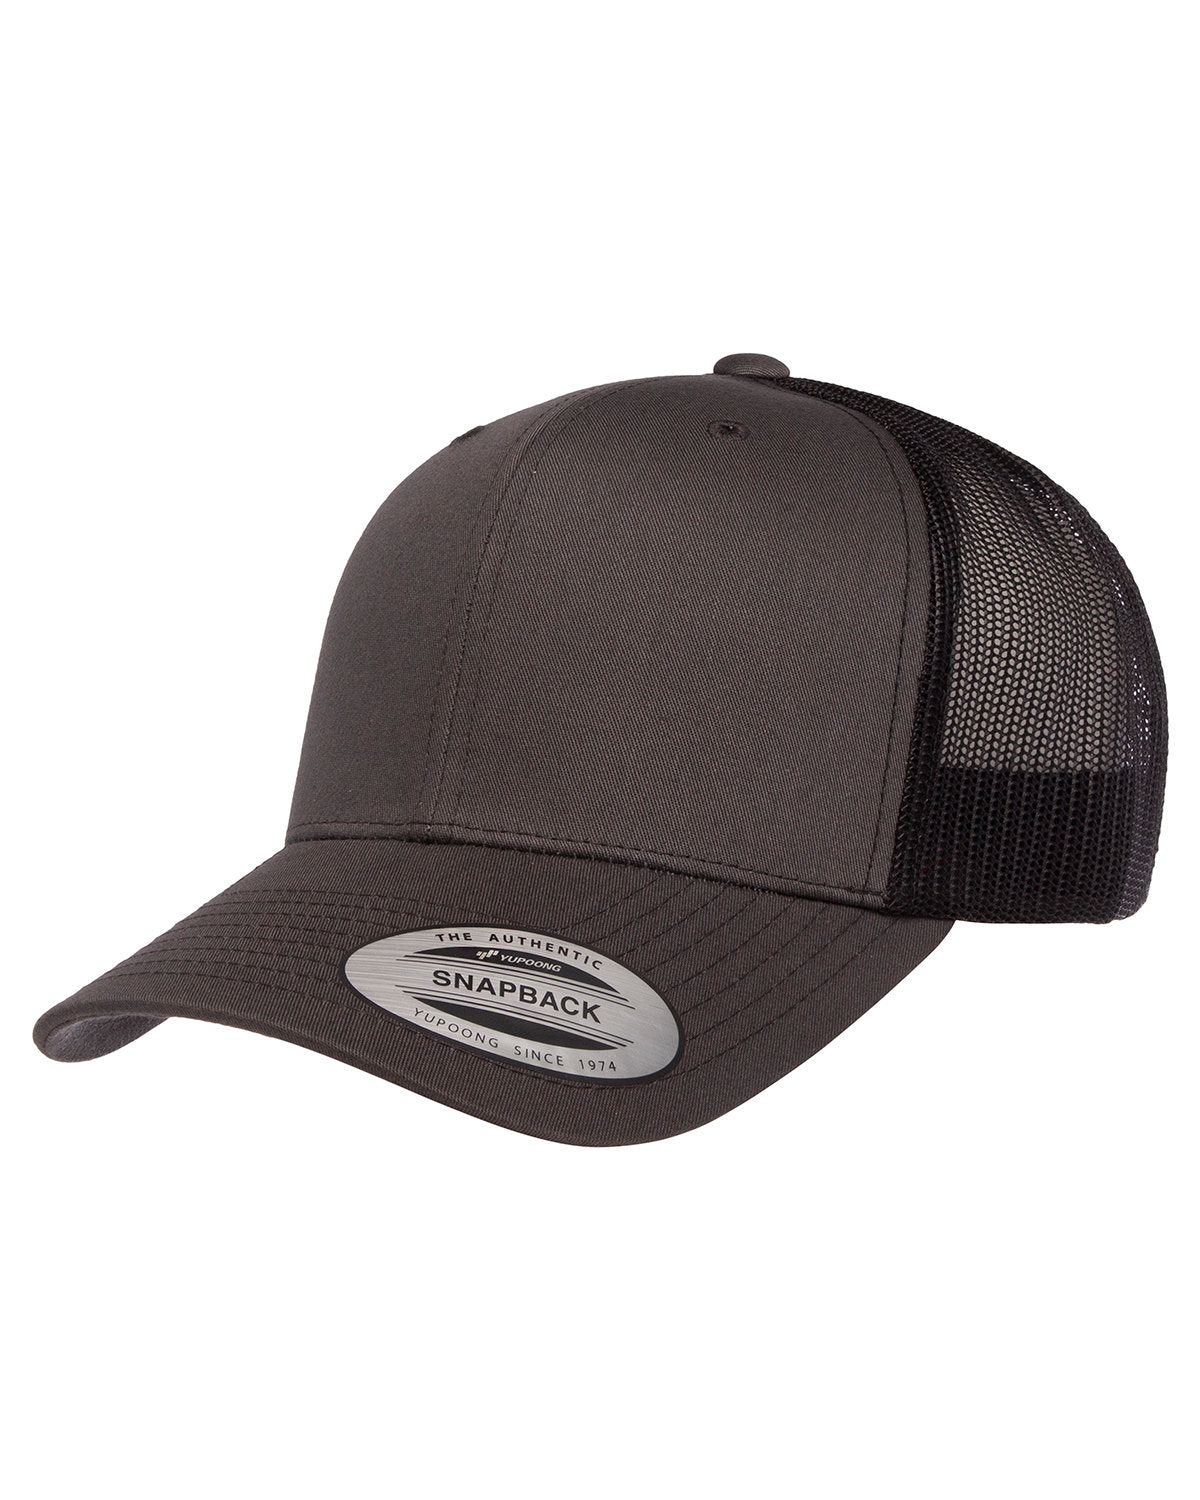 Yupoong Retro Branded Trucker Caps, Charcoal/ Black